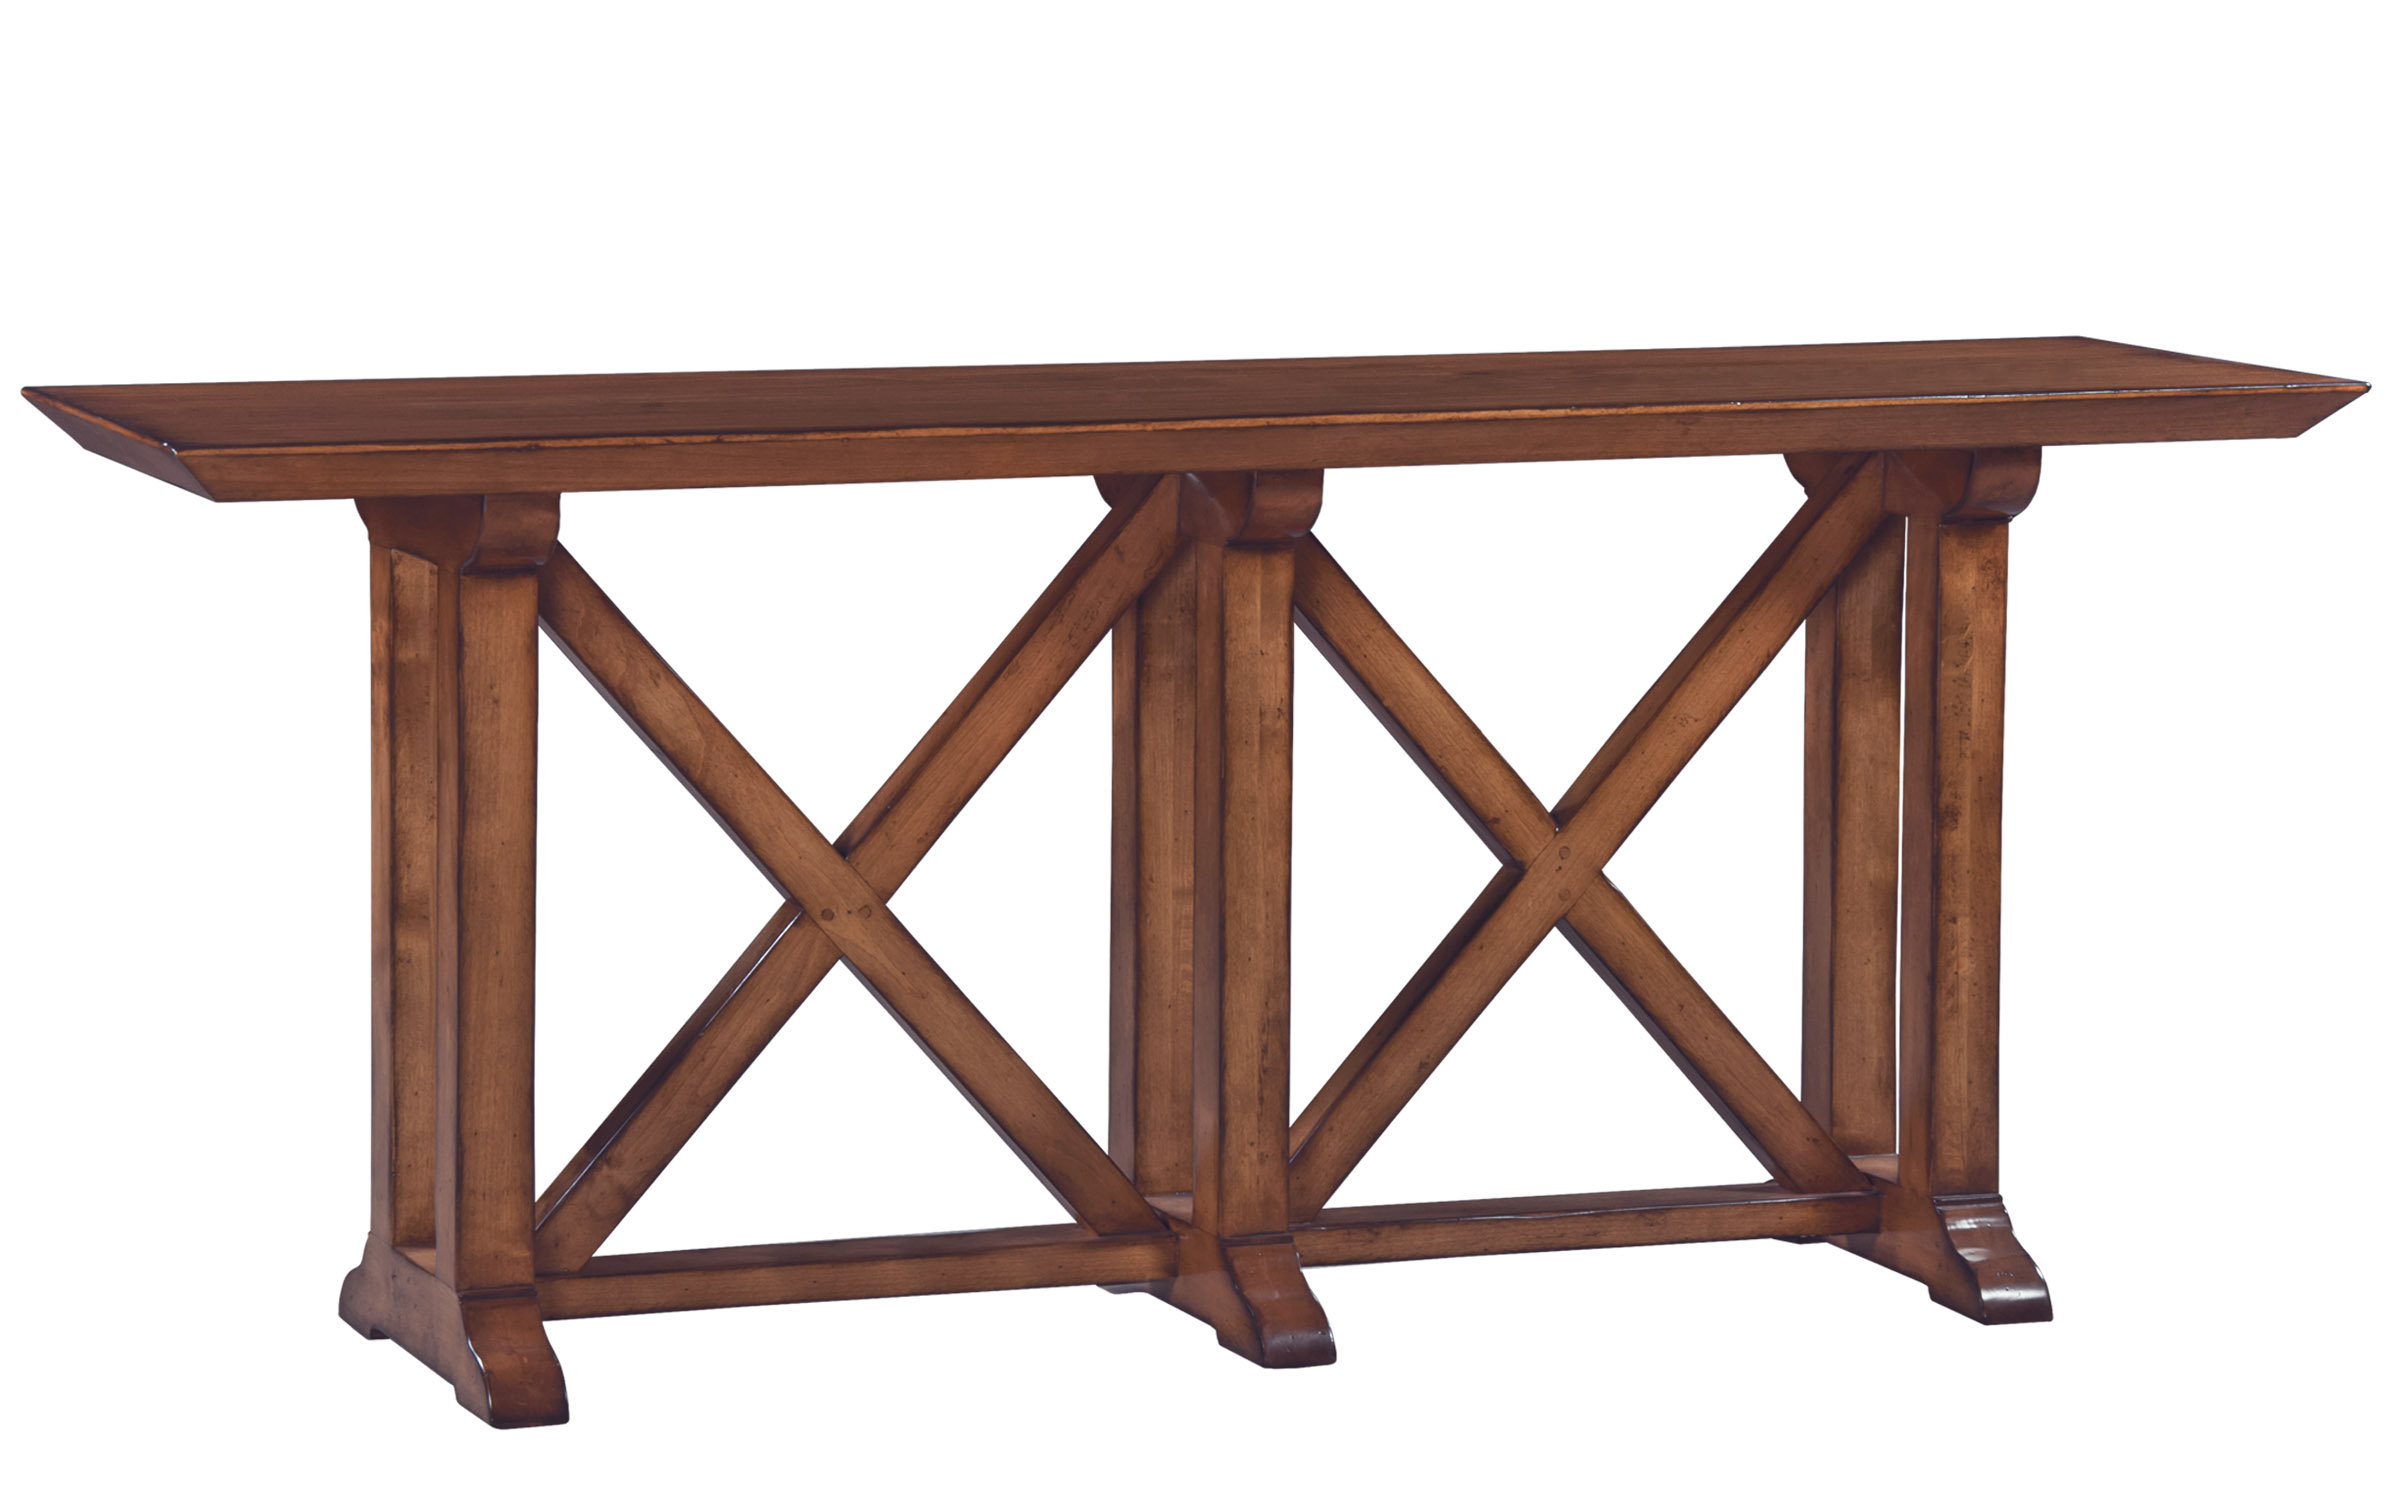 Xavier transitional contemporary sofa table console by Woodland furniture in Idaho Falls